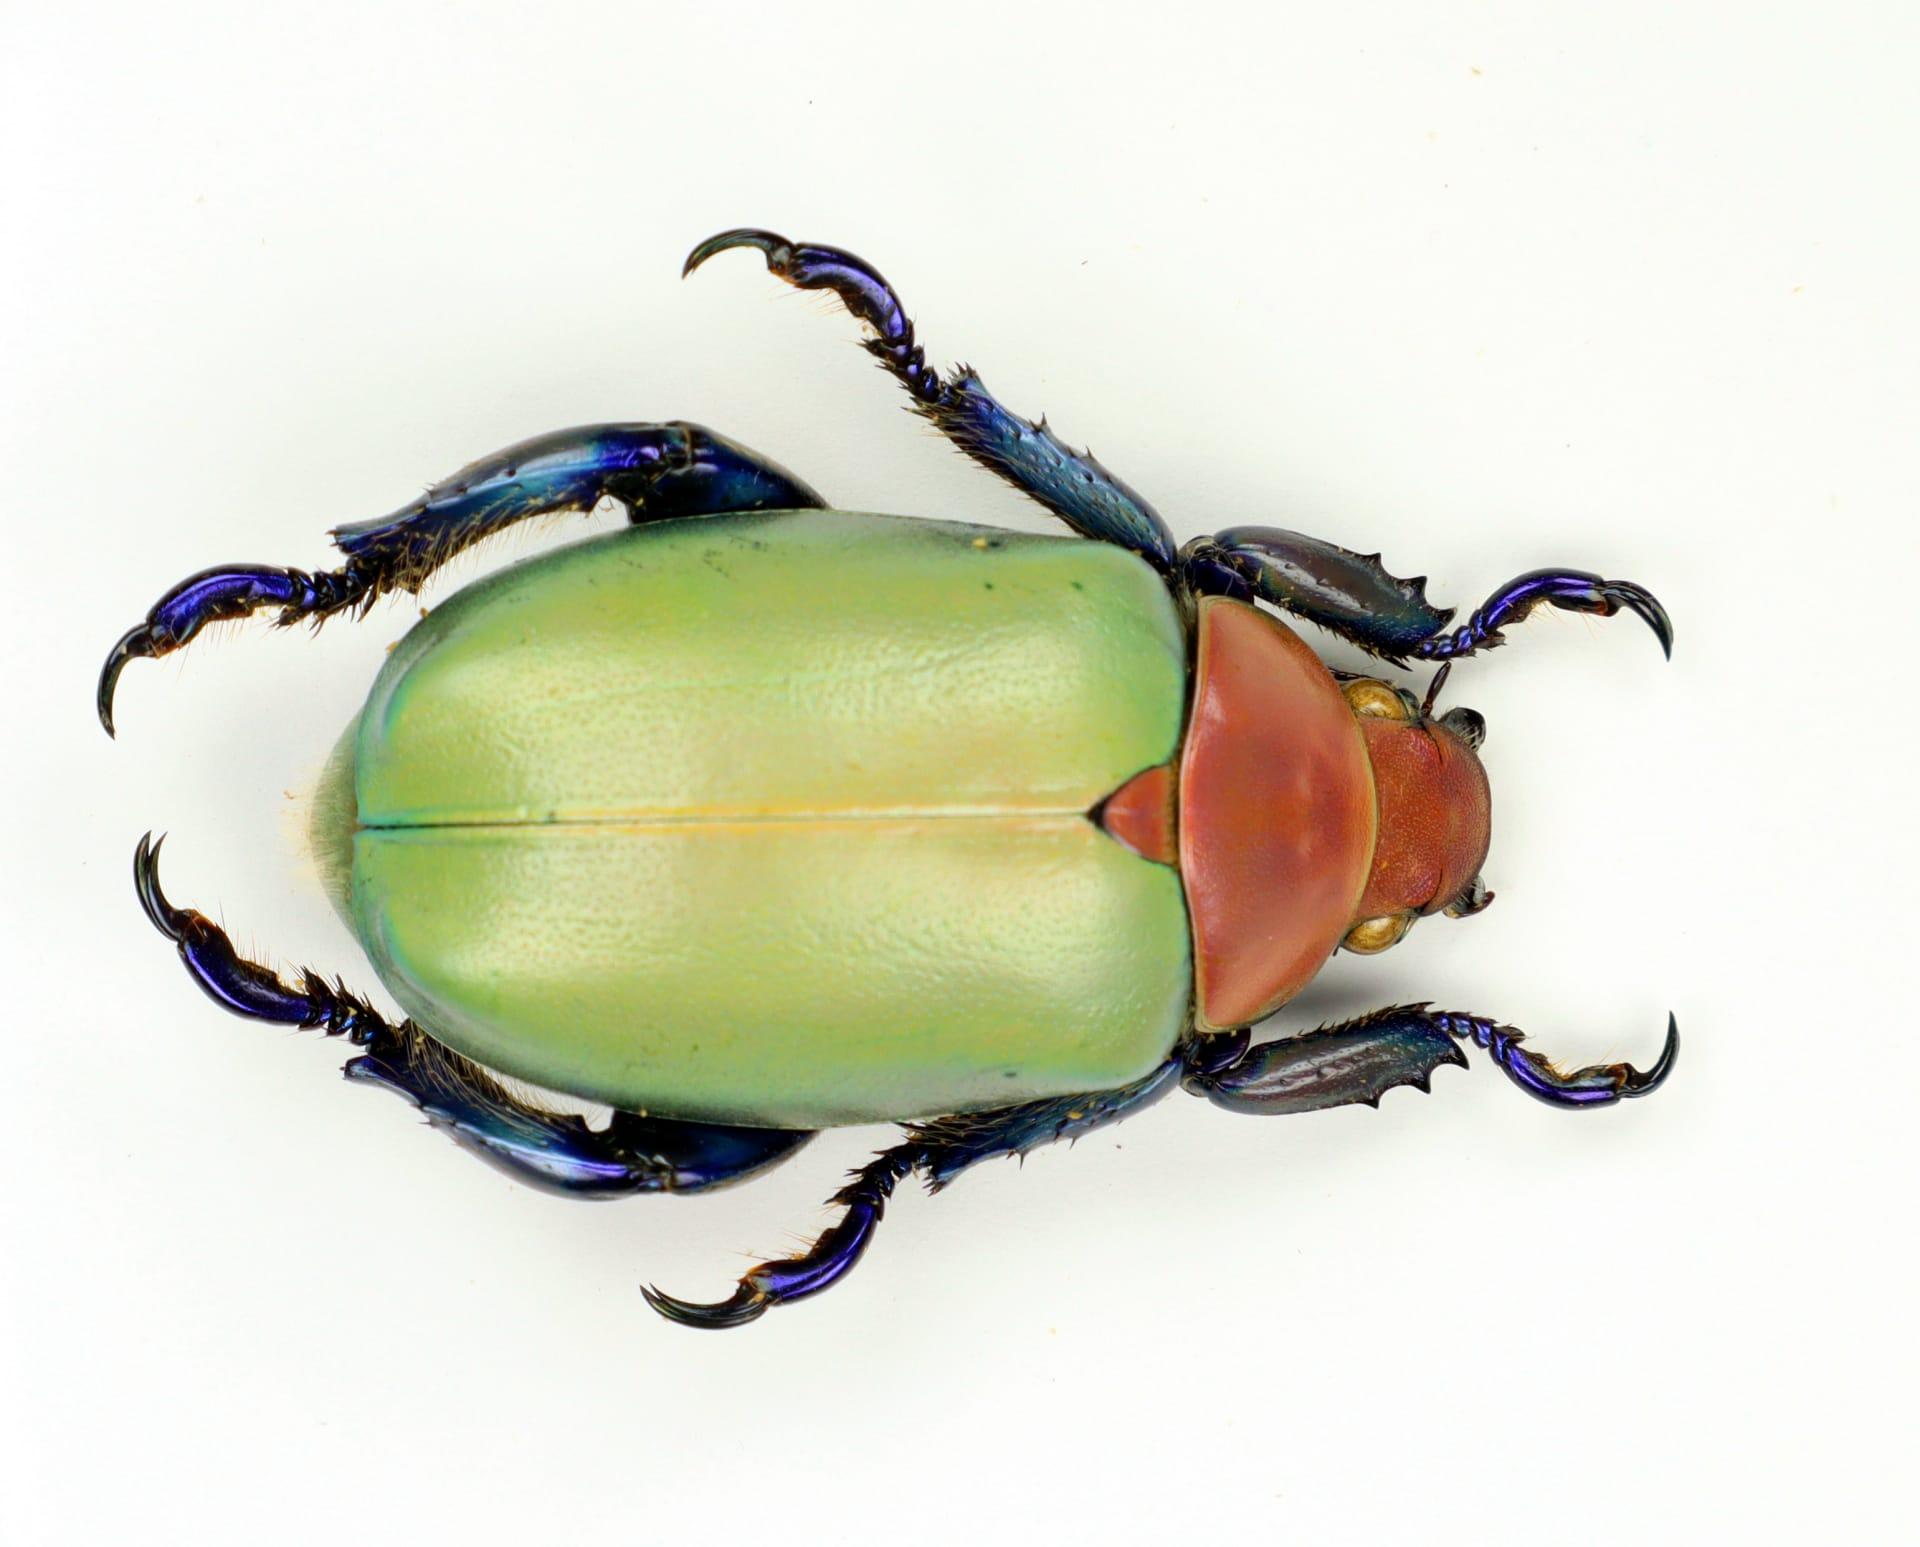 Japanese beetle pictures